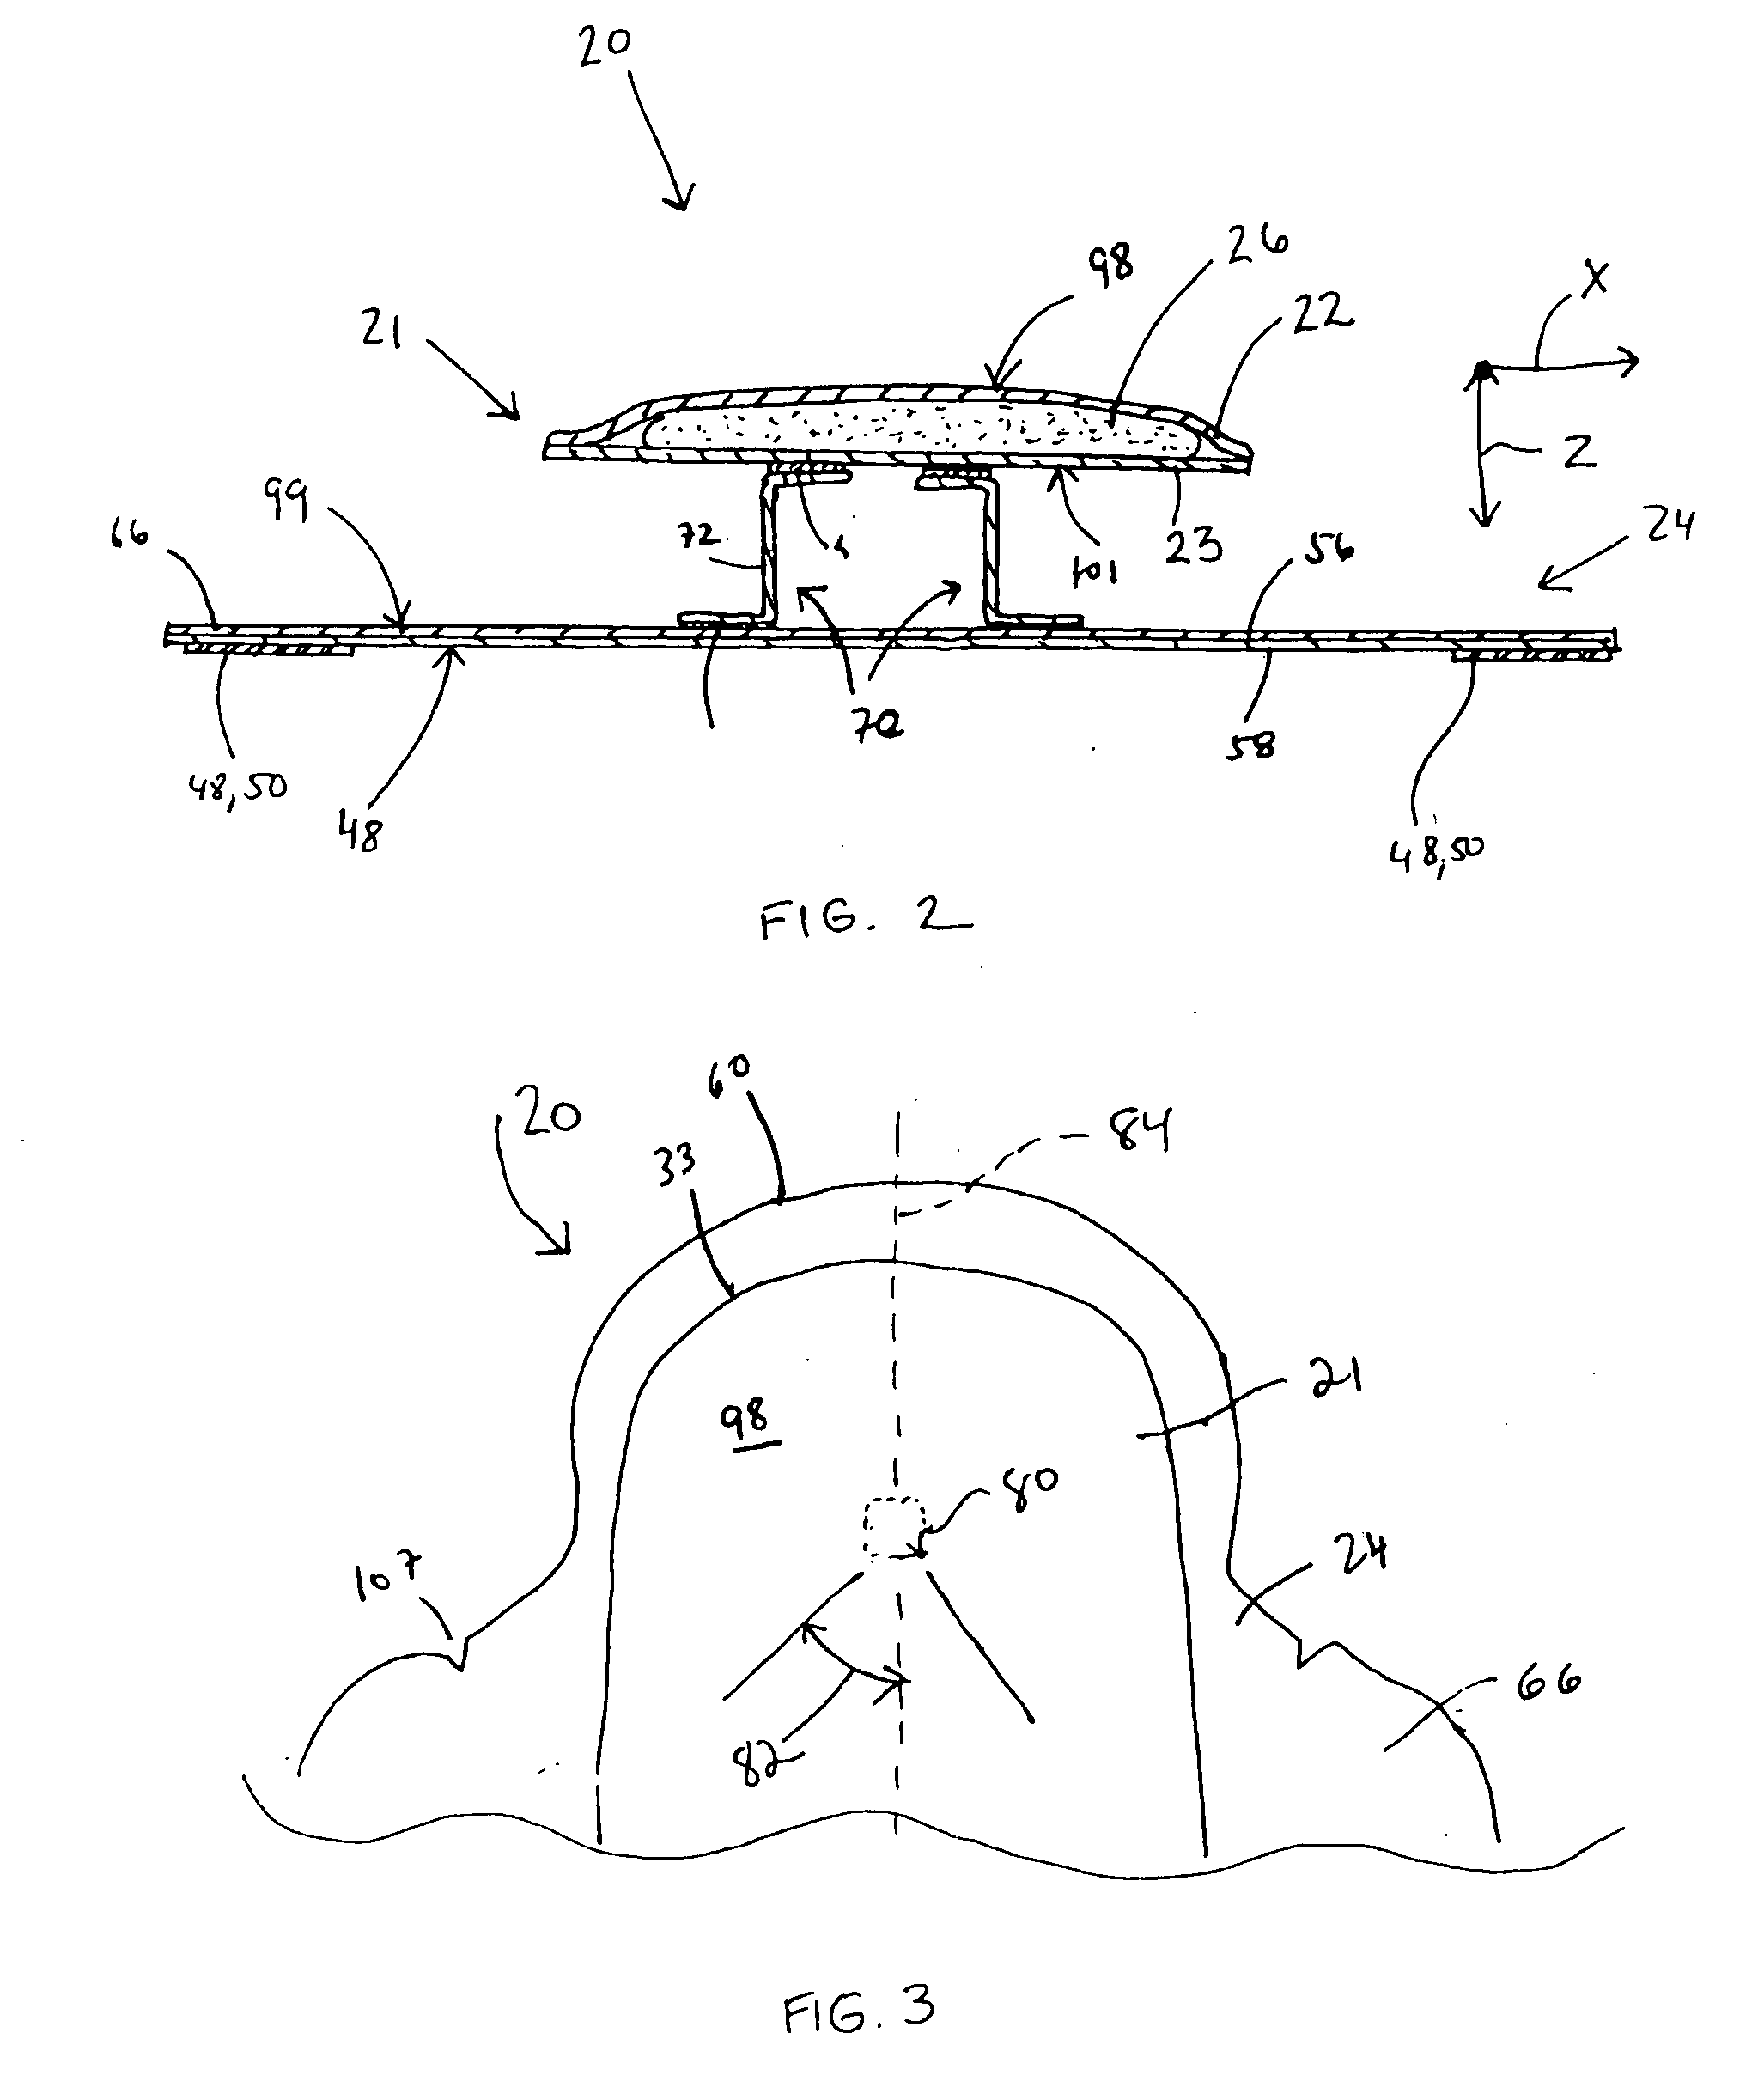 Compound absorbent article with improved body contact